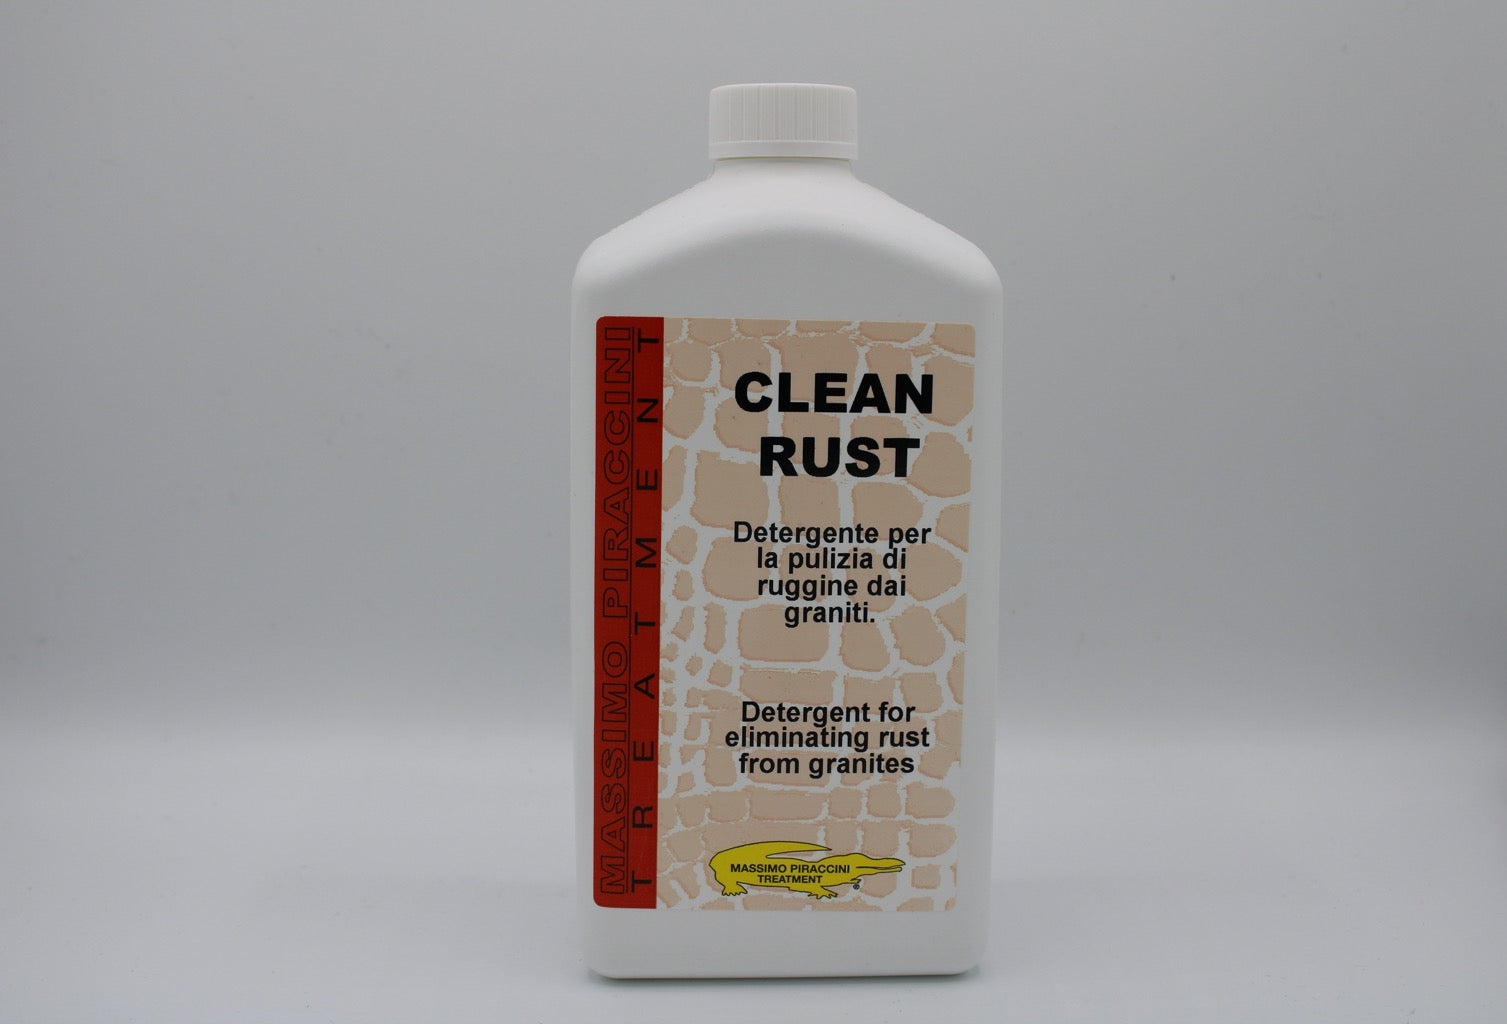 CLEAN RUST - Cleaner for rust